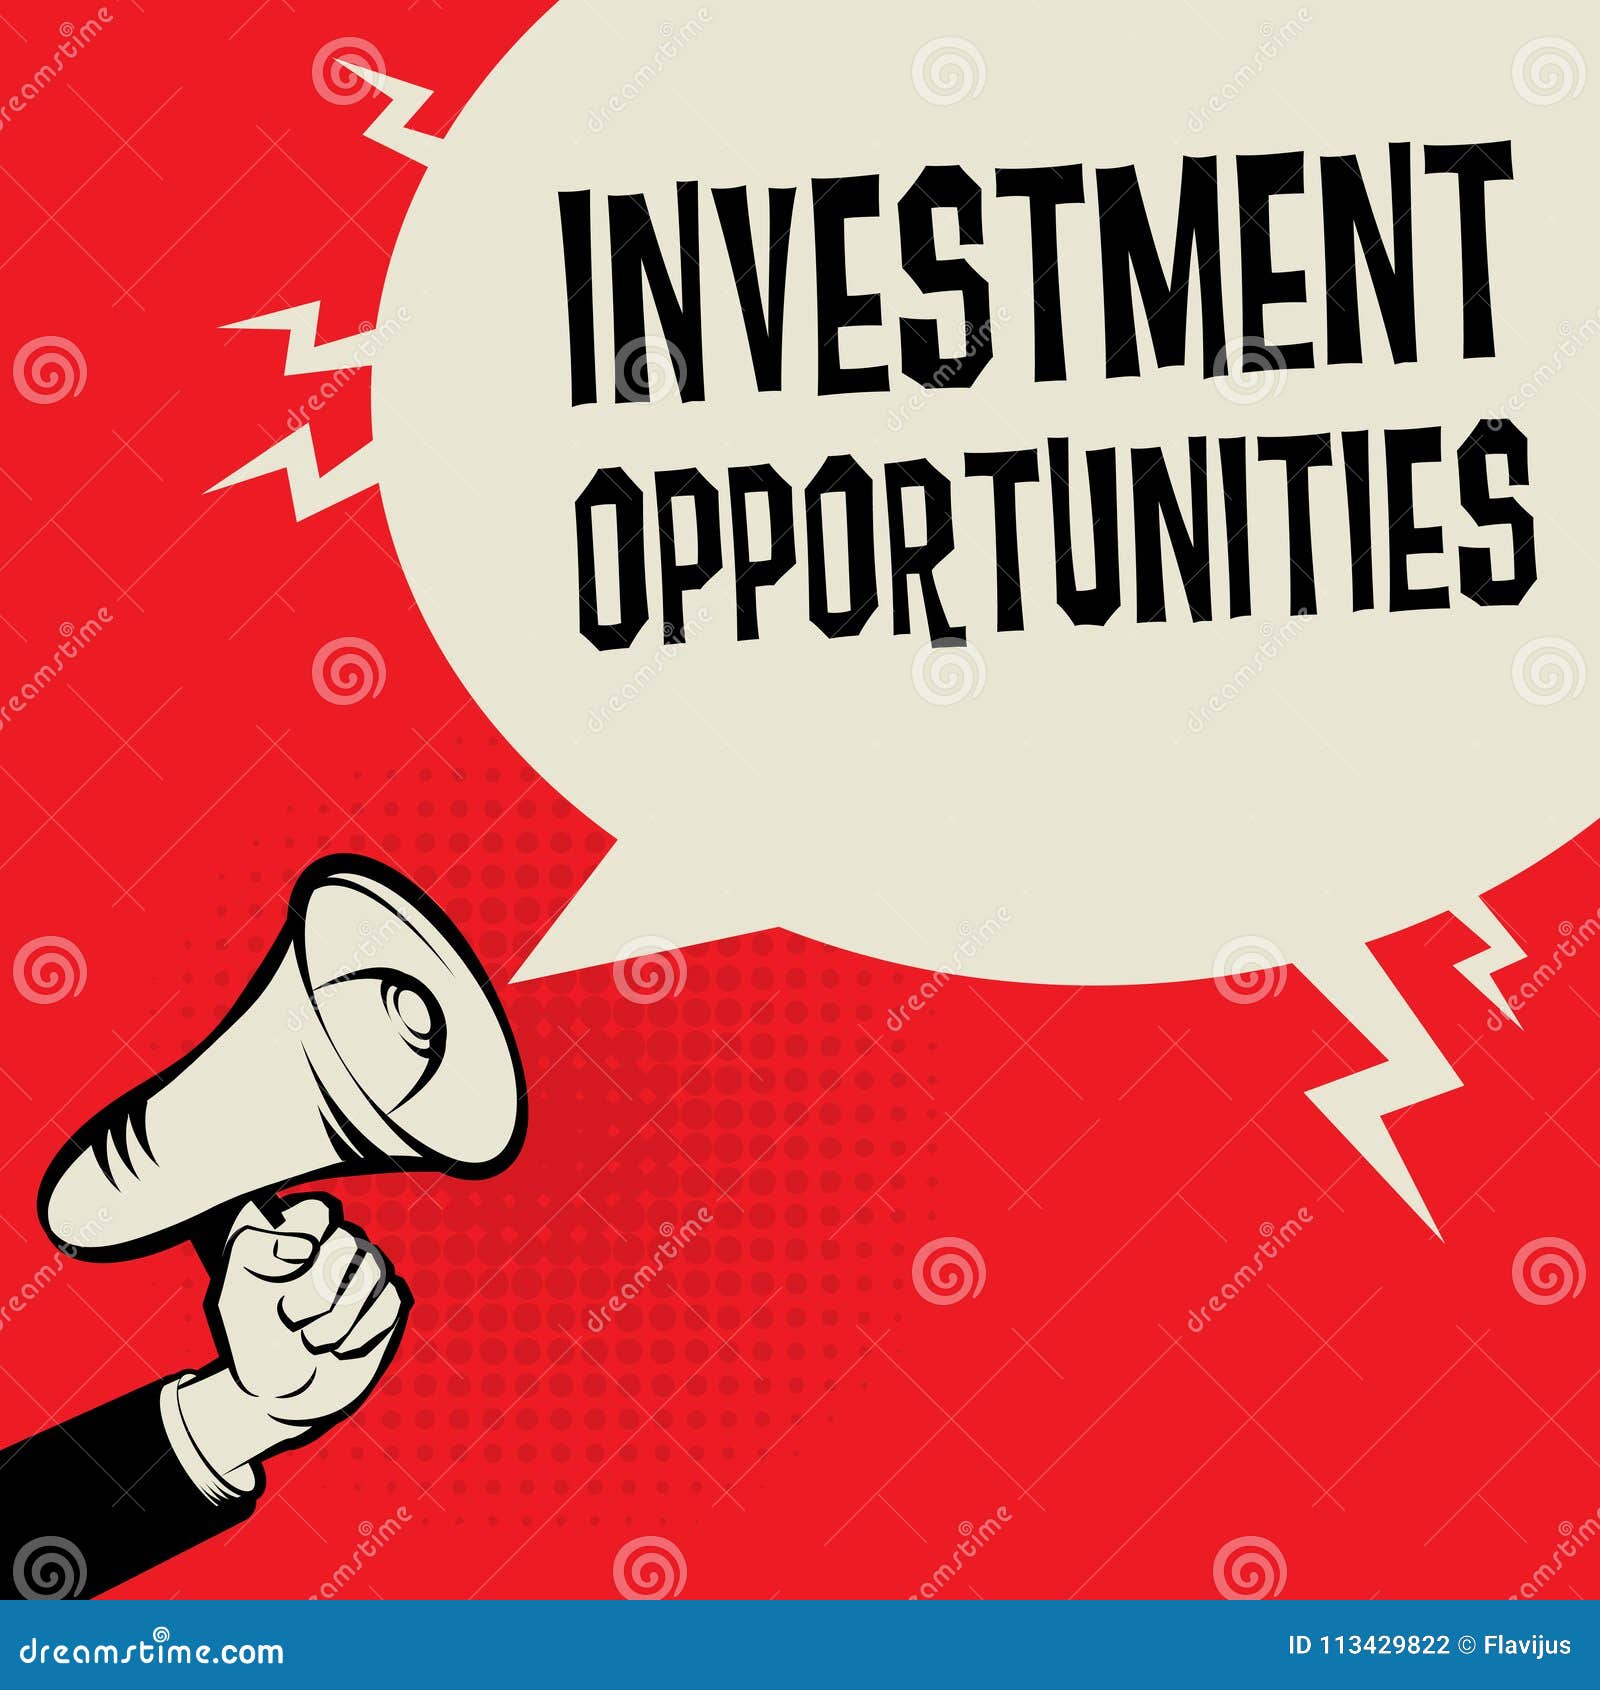 Investment Opportunities Business Concept Stock Vector - Illustration